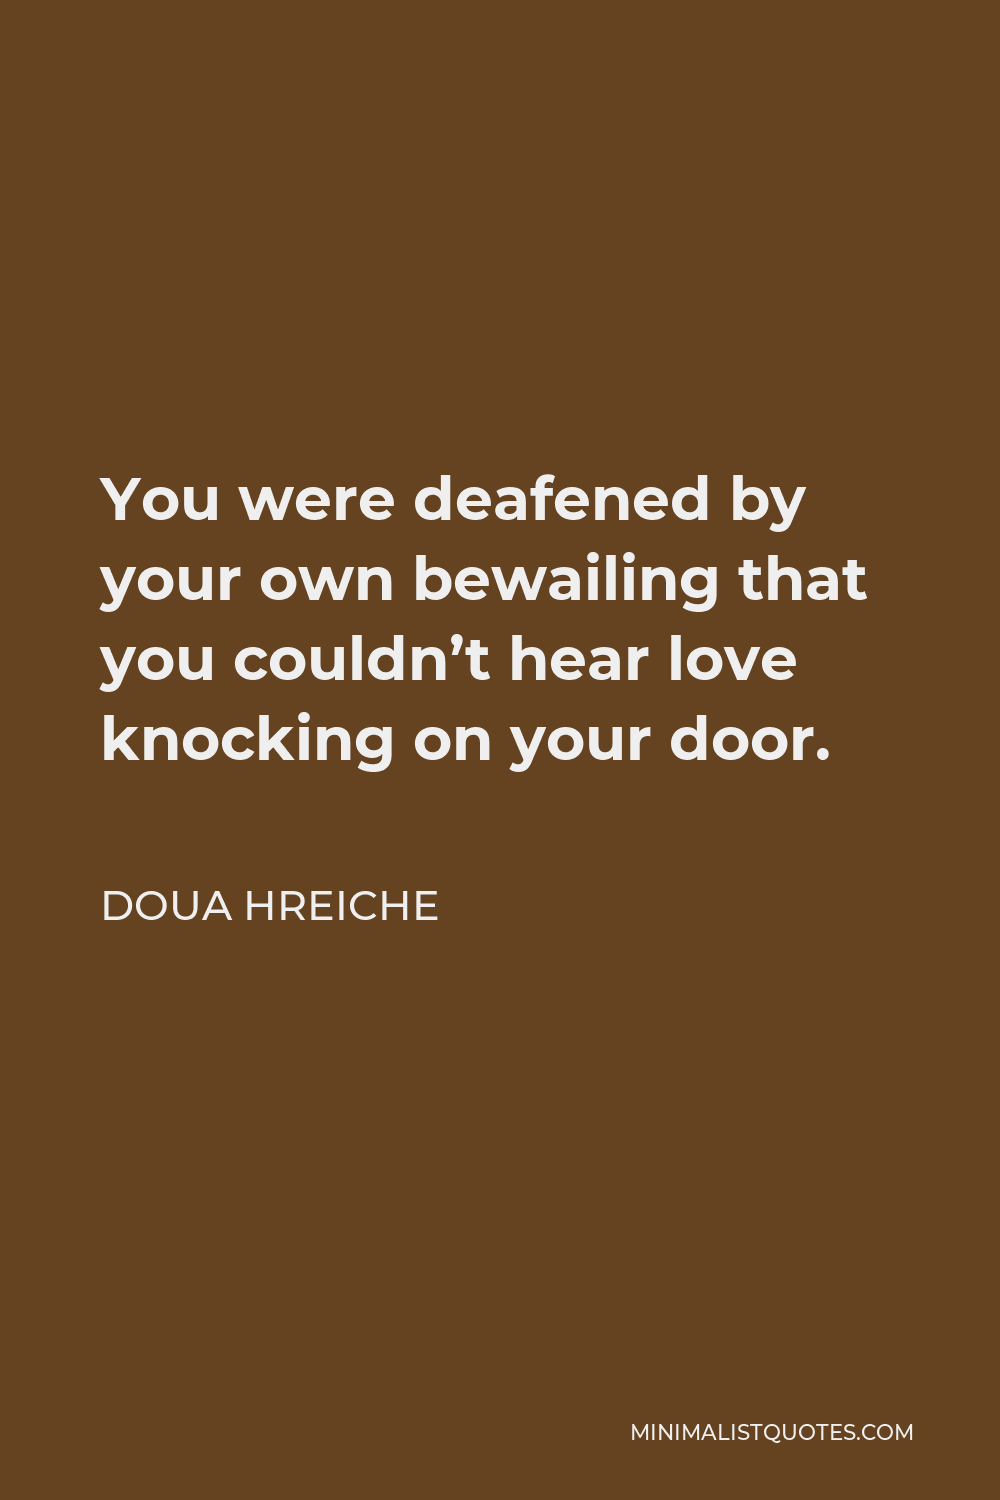 Doua Hreiche Quote - You were deafened by your own bewailing that you couldn’t hear love knocking on your door.